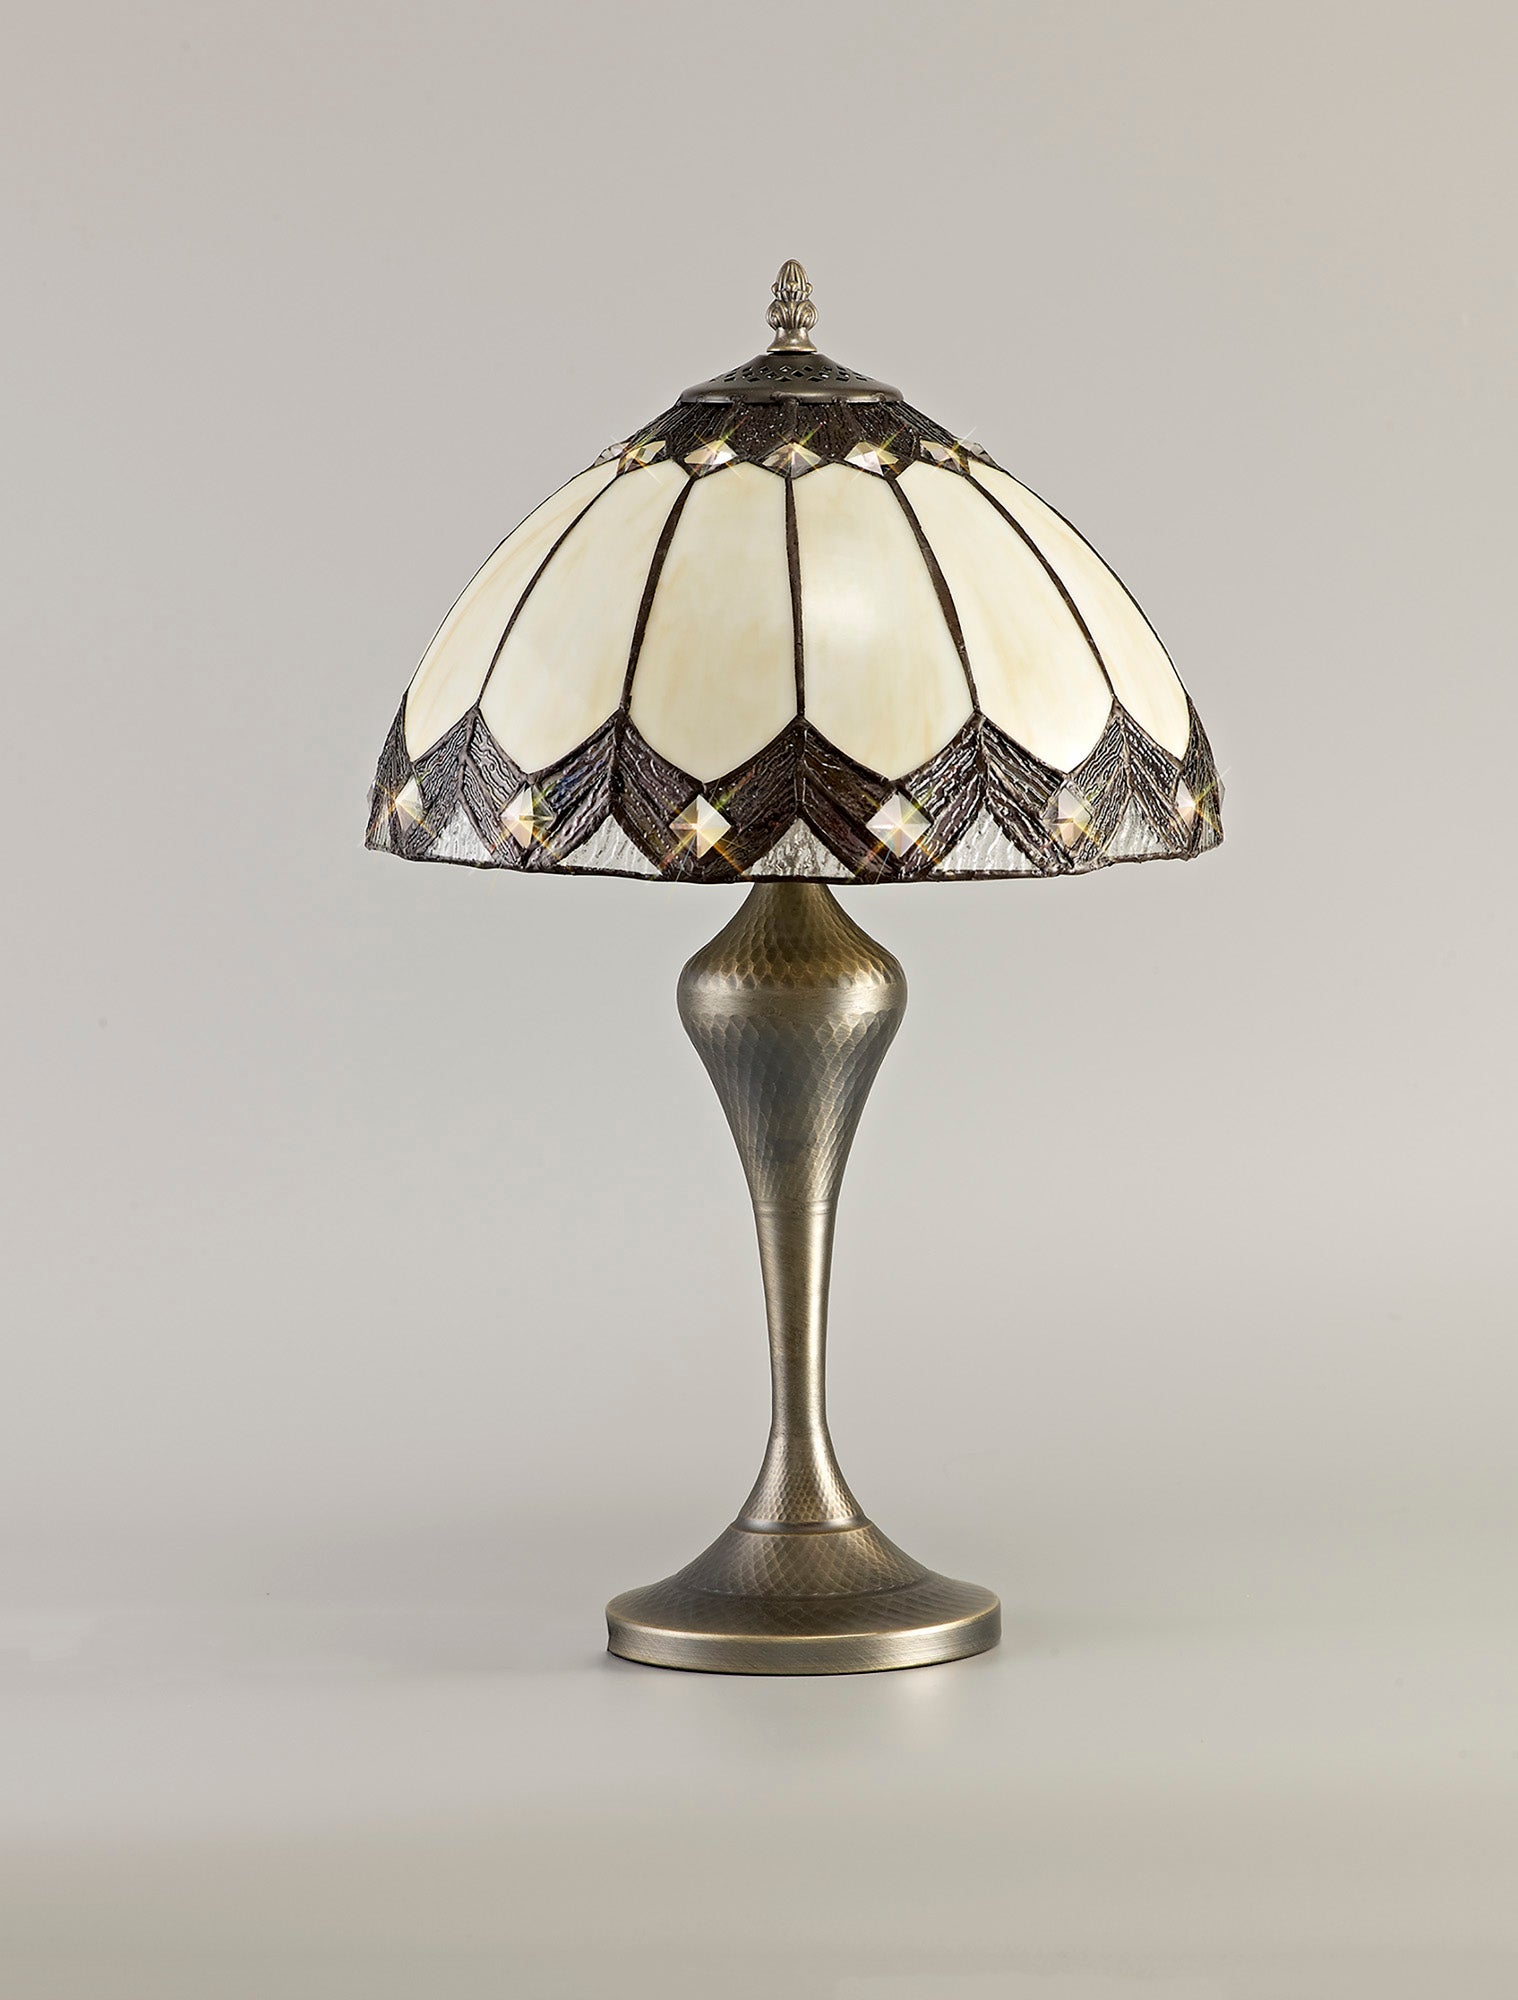 Blenheimtif Tiffany Table Lamp, 1 x E27, Aged Antique Brass Base/Crealm/Brown Glass/Clear Crystal